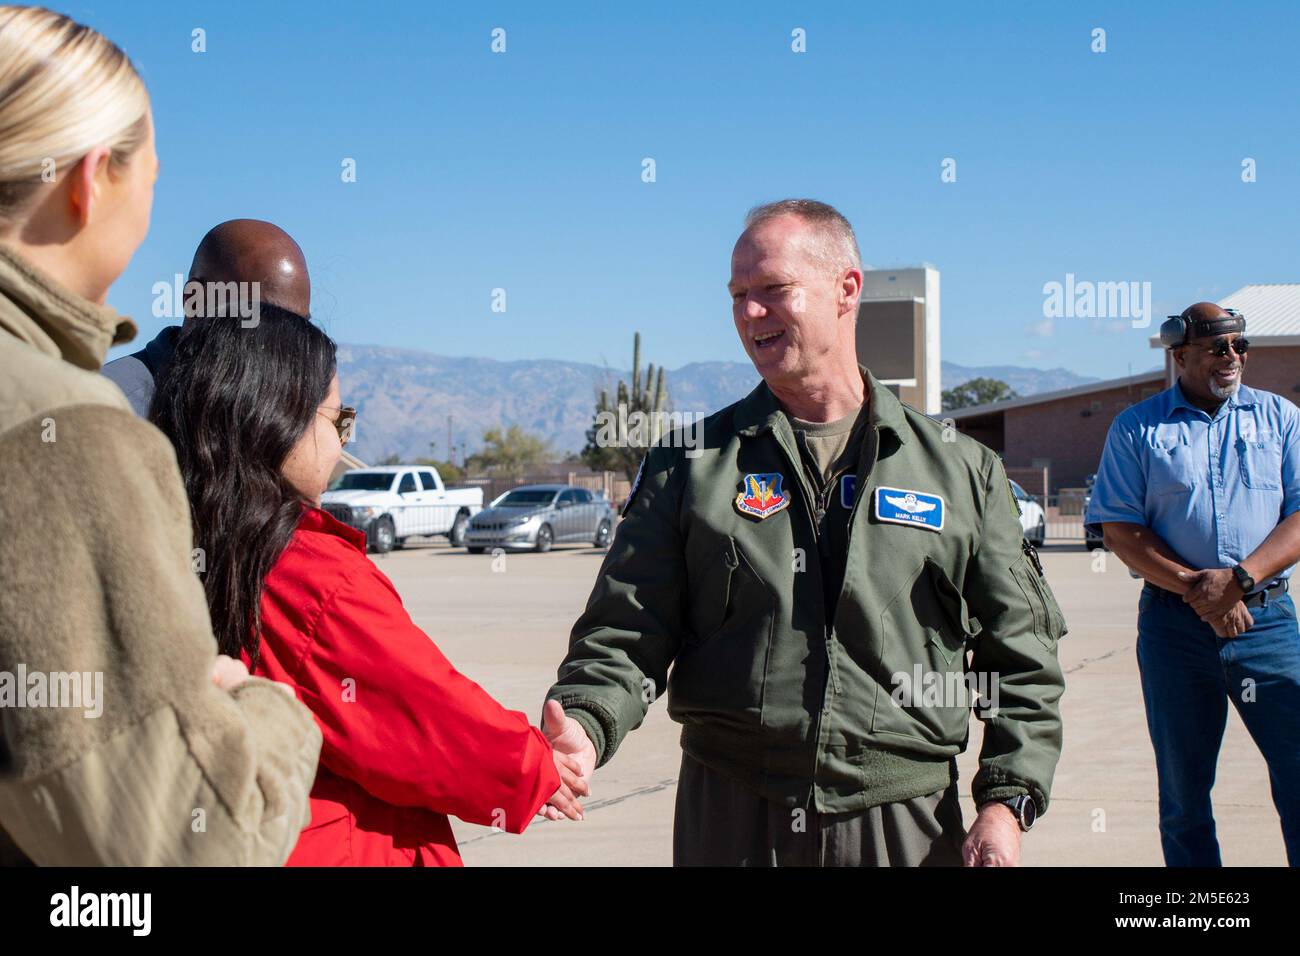 U.S. Air Force Gen. Mark Kelly, commander of Air Combat Command, greets the 355th Wing Protocol team during Heritage Flight Training Course at Davis-Monthan Air Force Base, Arizona, March 6, 2022. Kelly certified ACC’s Heritage Flight Training Course hosted at Davis-Monthan Air Force Base, Arizona, from March 2-6. Stock Photo